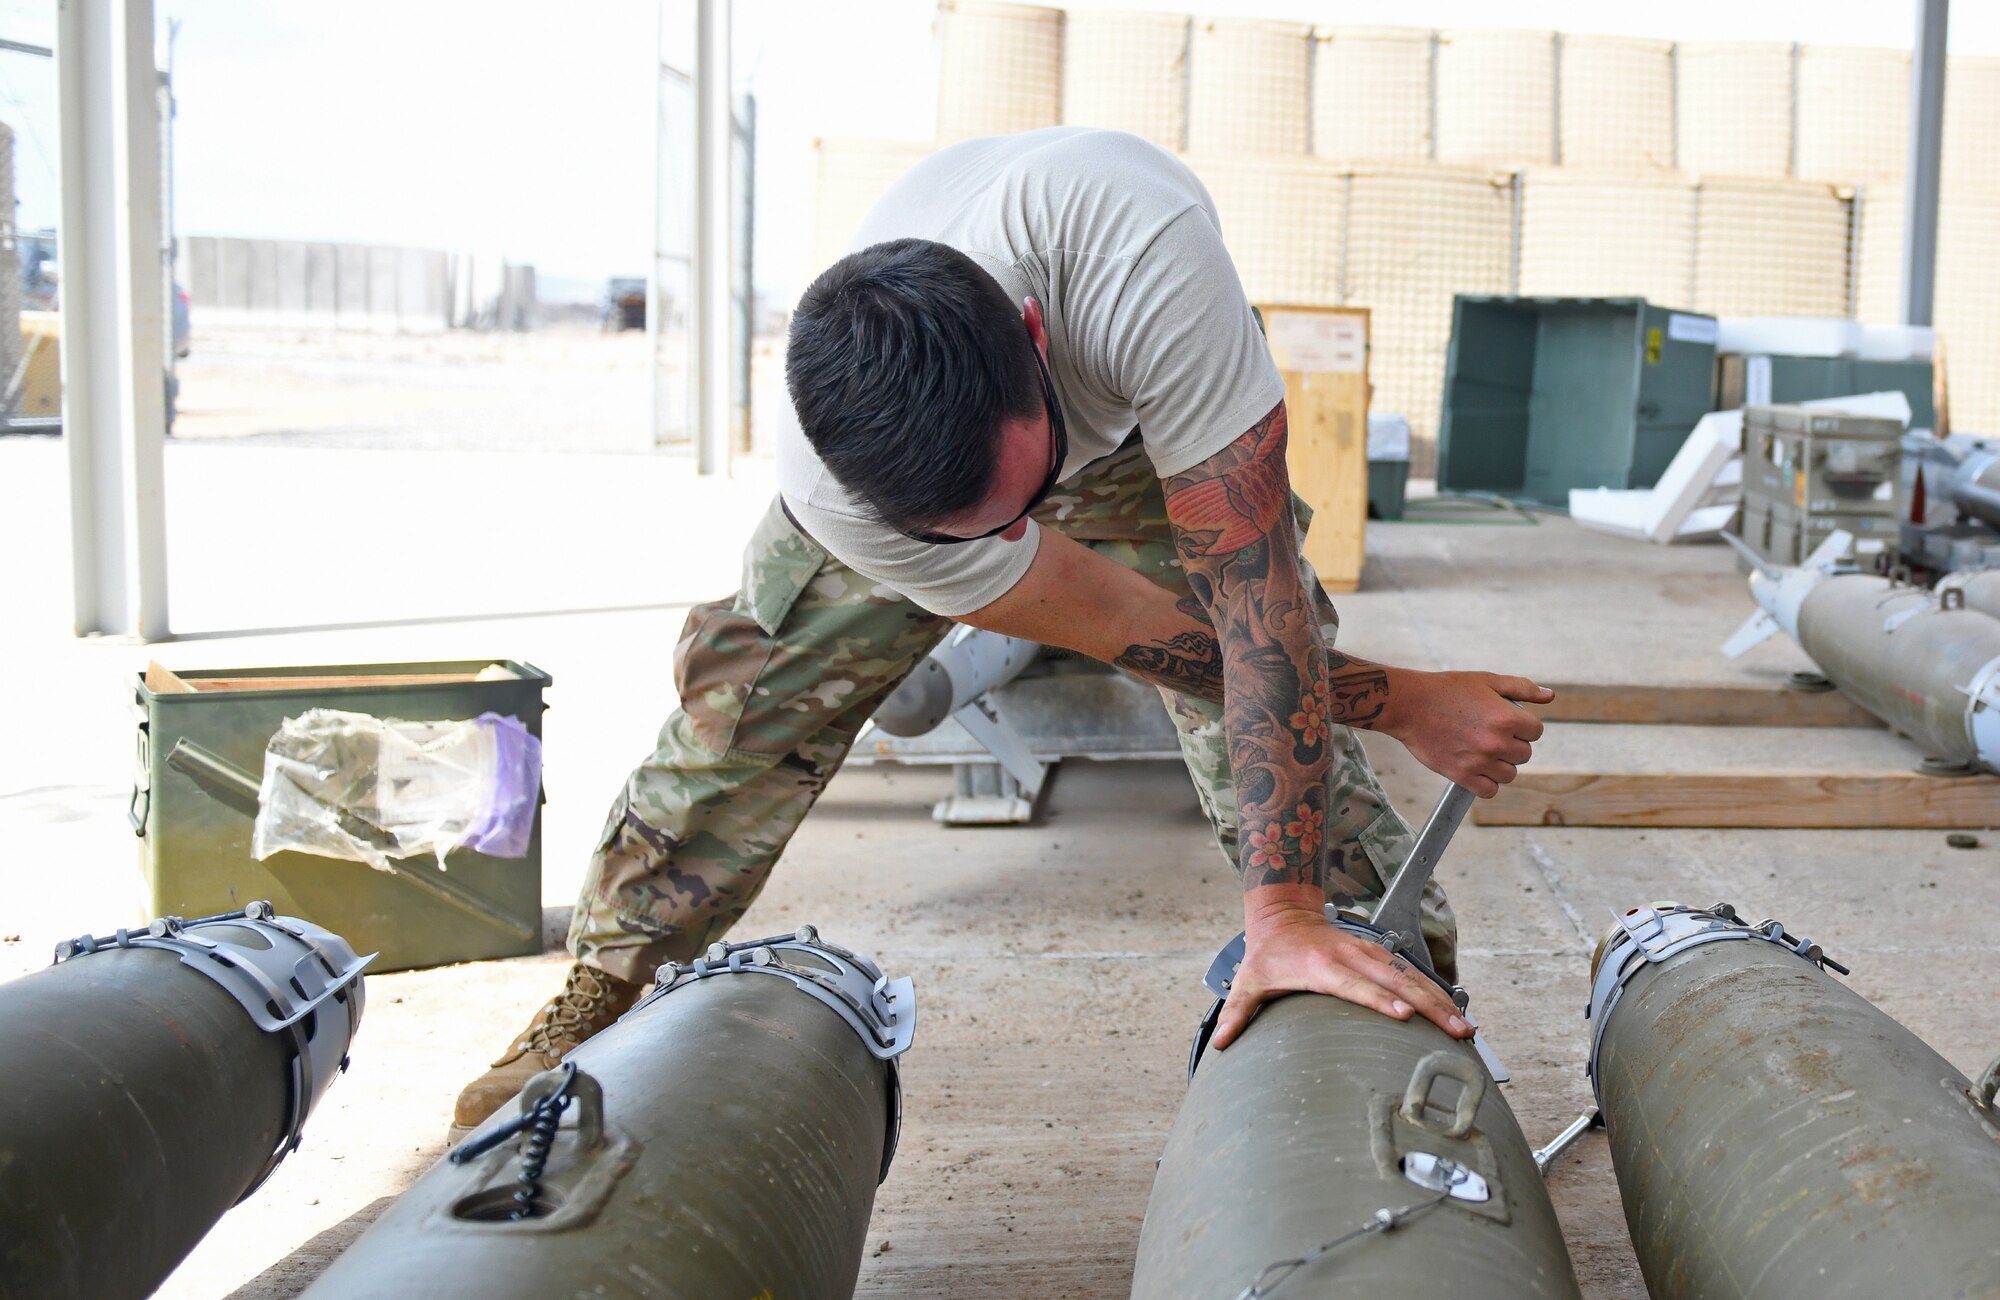 U.S. Air Force Tech. Sgt. Brandon Coleman, 726th Expeditionary Air Base Squadron senior munitions inspector, assembles the nose of munitions during a bomb build at Chabelley Airfield, Djibouti, Nov. 12, 2019. The 726th EABS Munitions Systems Airmen build, inspect and store all munitions at the airfield, ensuring mission effectiveness at a moment’s notice. (U.S. Air Force photo by Staff Sgt. Alex Fox Echols III)